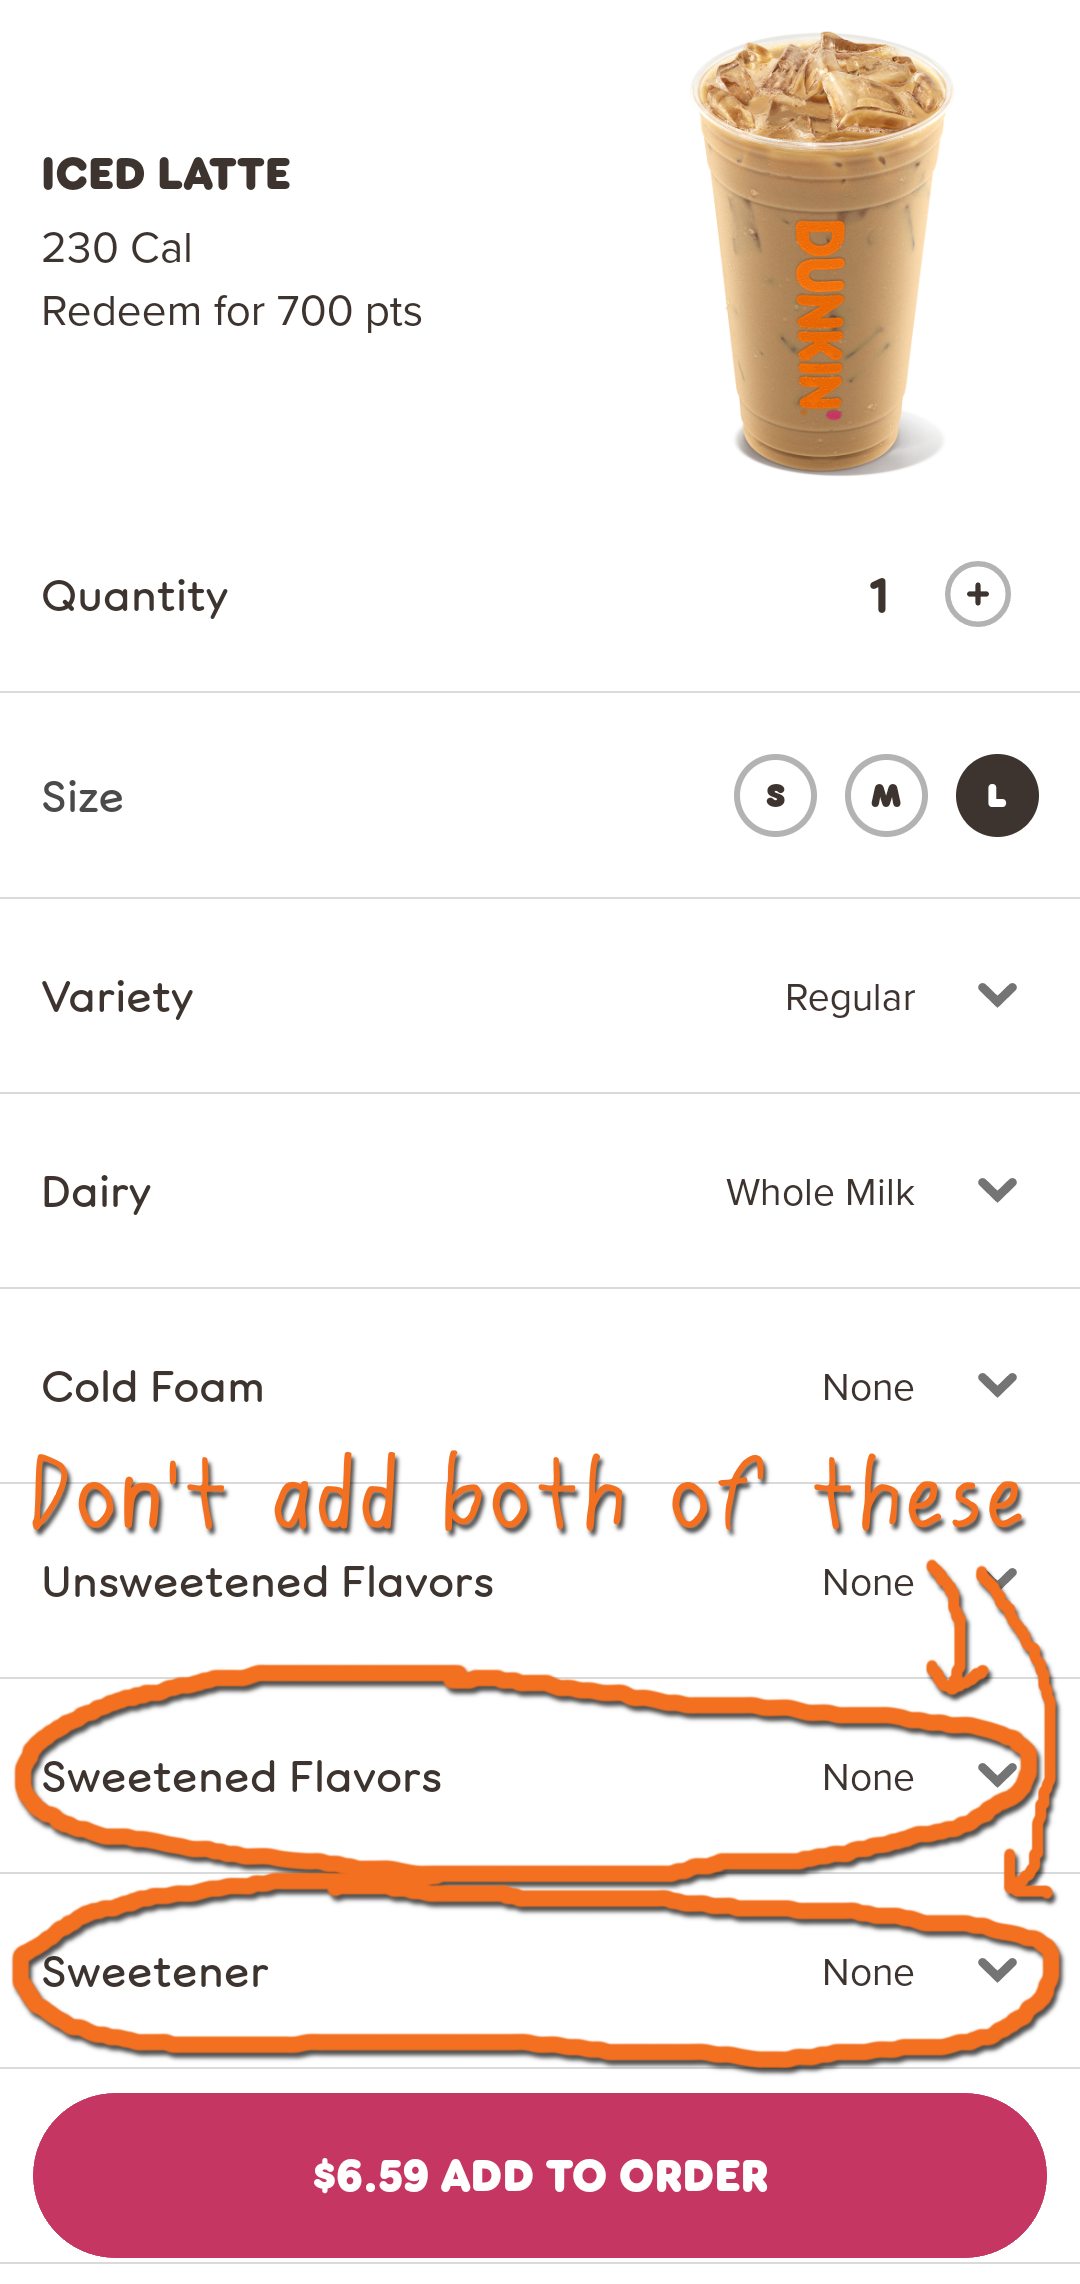 Screenshot of Dunkin' app with "Sweetened Flavors" and "Sweetener" circled and a warning of "Don't add both of these"